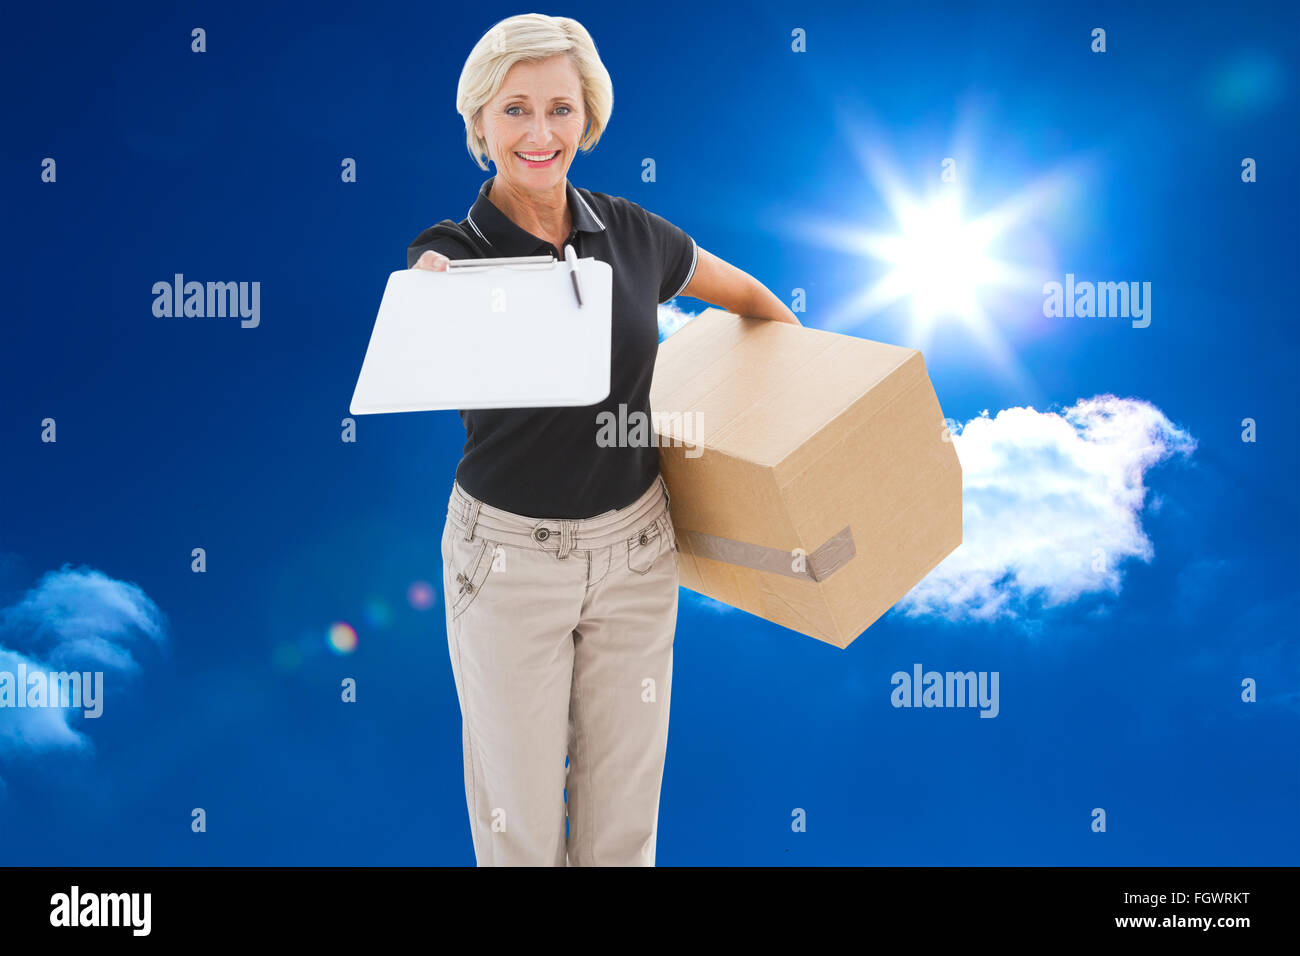 Composite image of happy delivery woman looking for signature Stock Photo